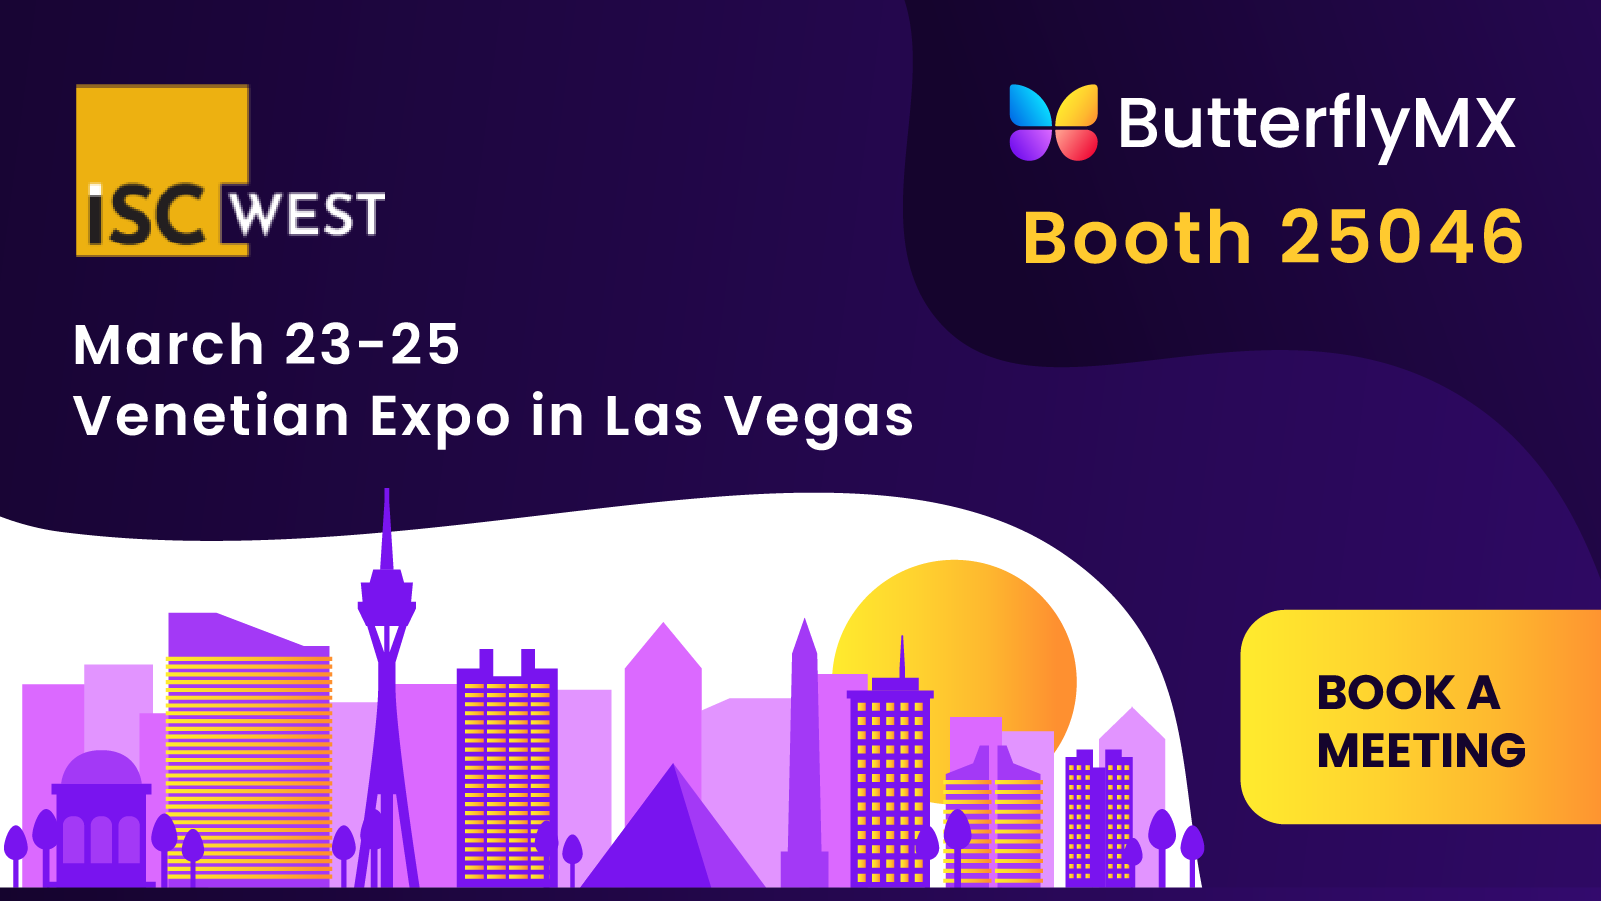 Meet ButterflyMX at ISC West in Las Vegas Booth 25046